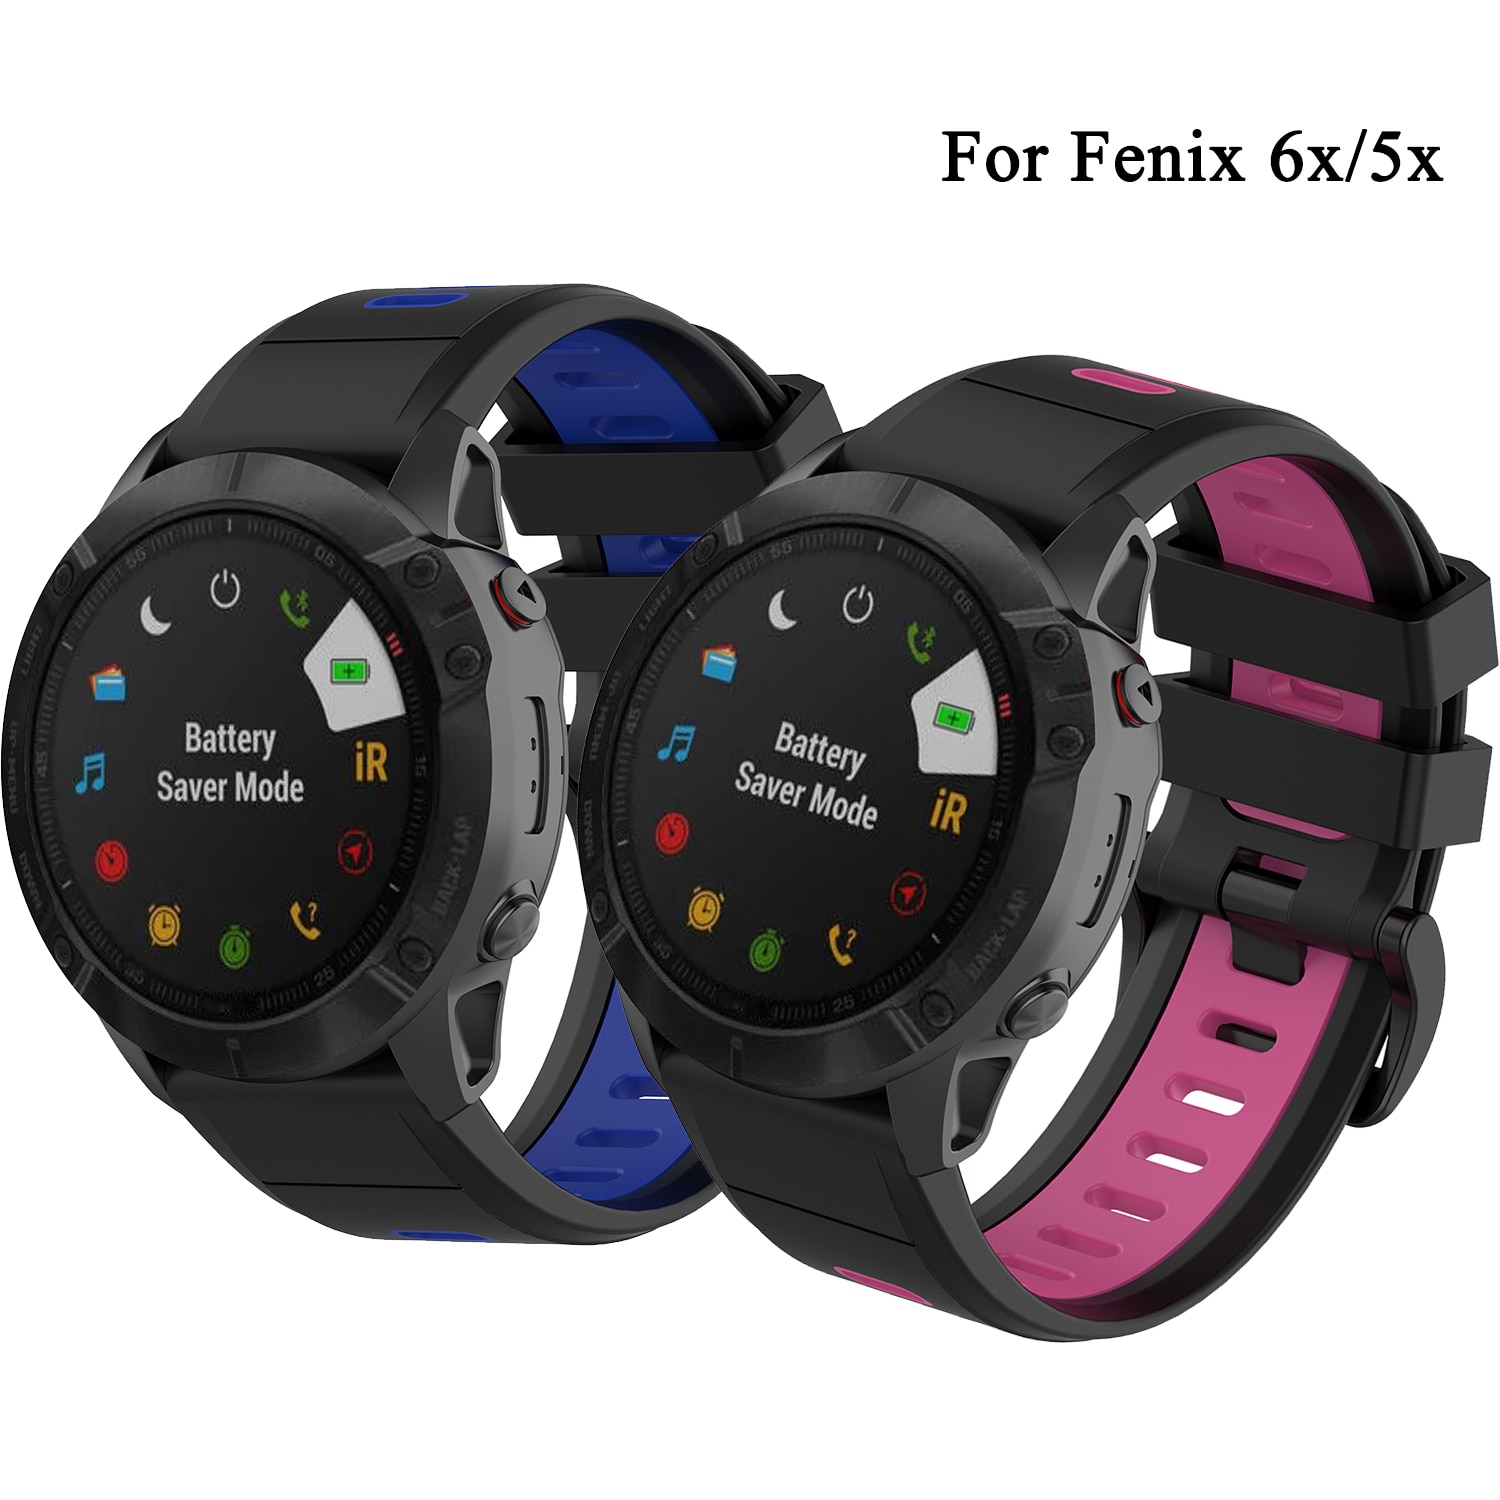 22mm Double Color Soft Silicone Band For Garmin Watch lnstinct Approach S62 S60 Quick Release Easy Fit Leisure Sport Strap Wristband